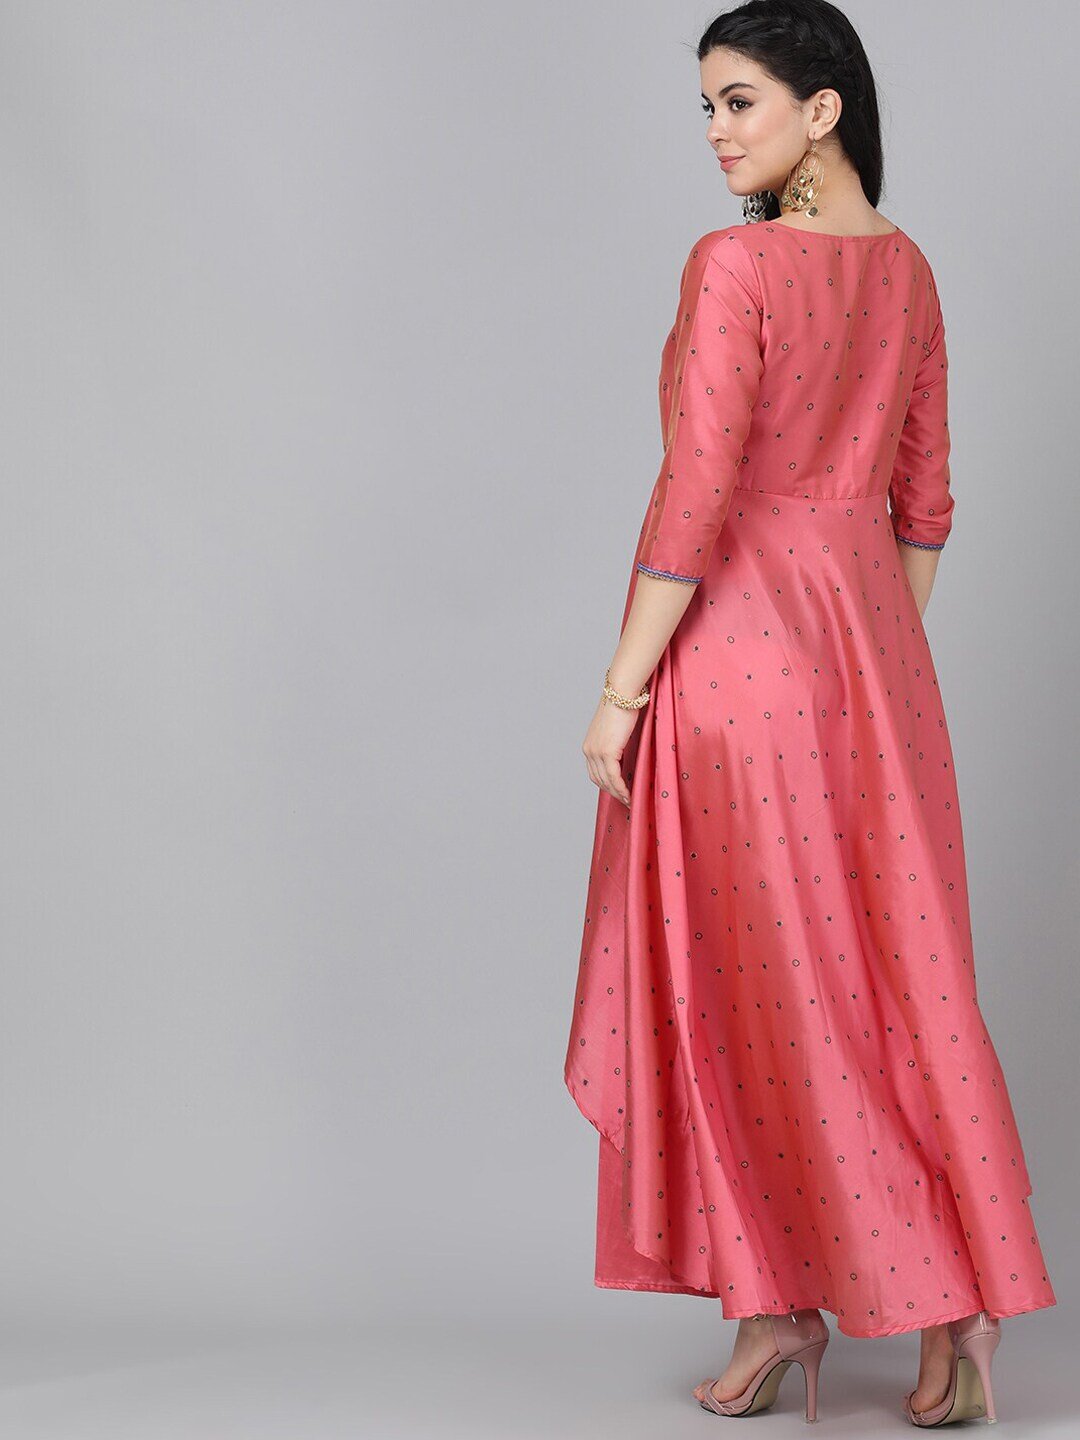 Women's  Pink Embroidered Layered Ethnic Maxi Dress - AKS